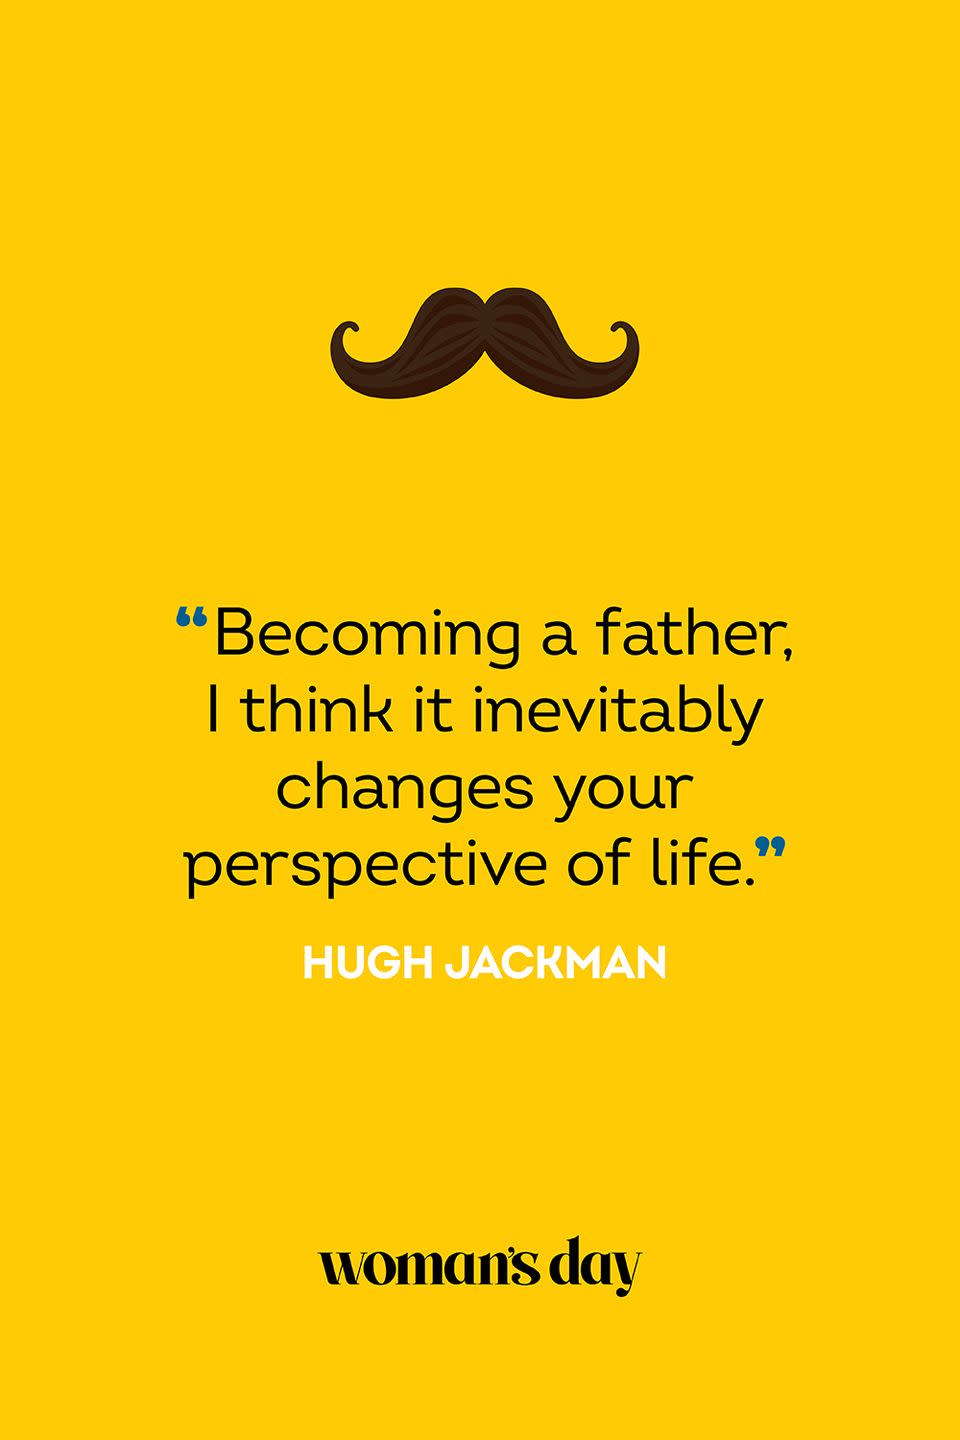 fathers day quotes hugh jackman